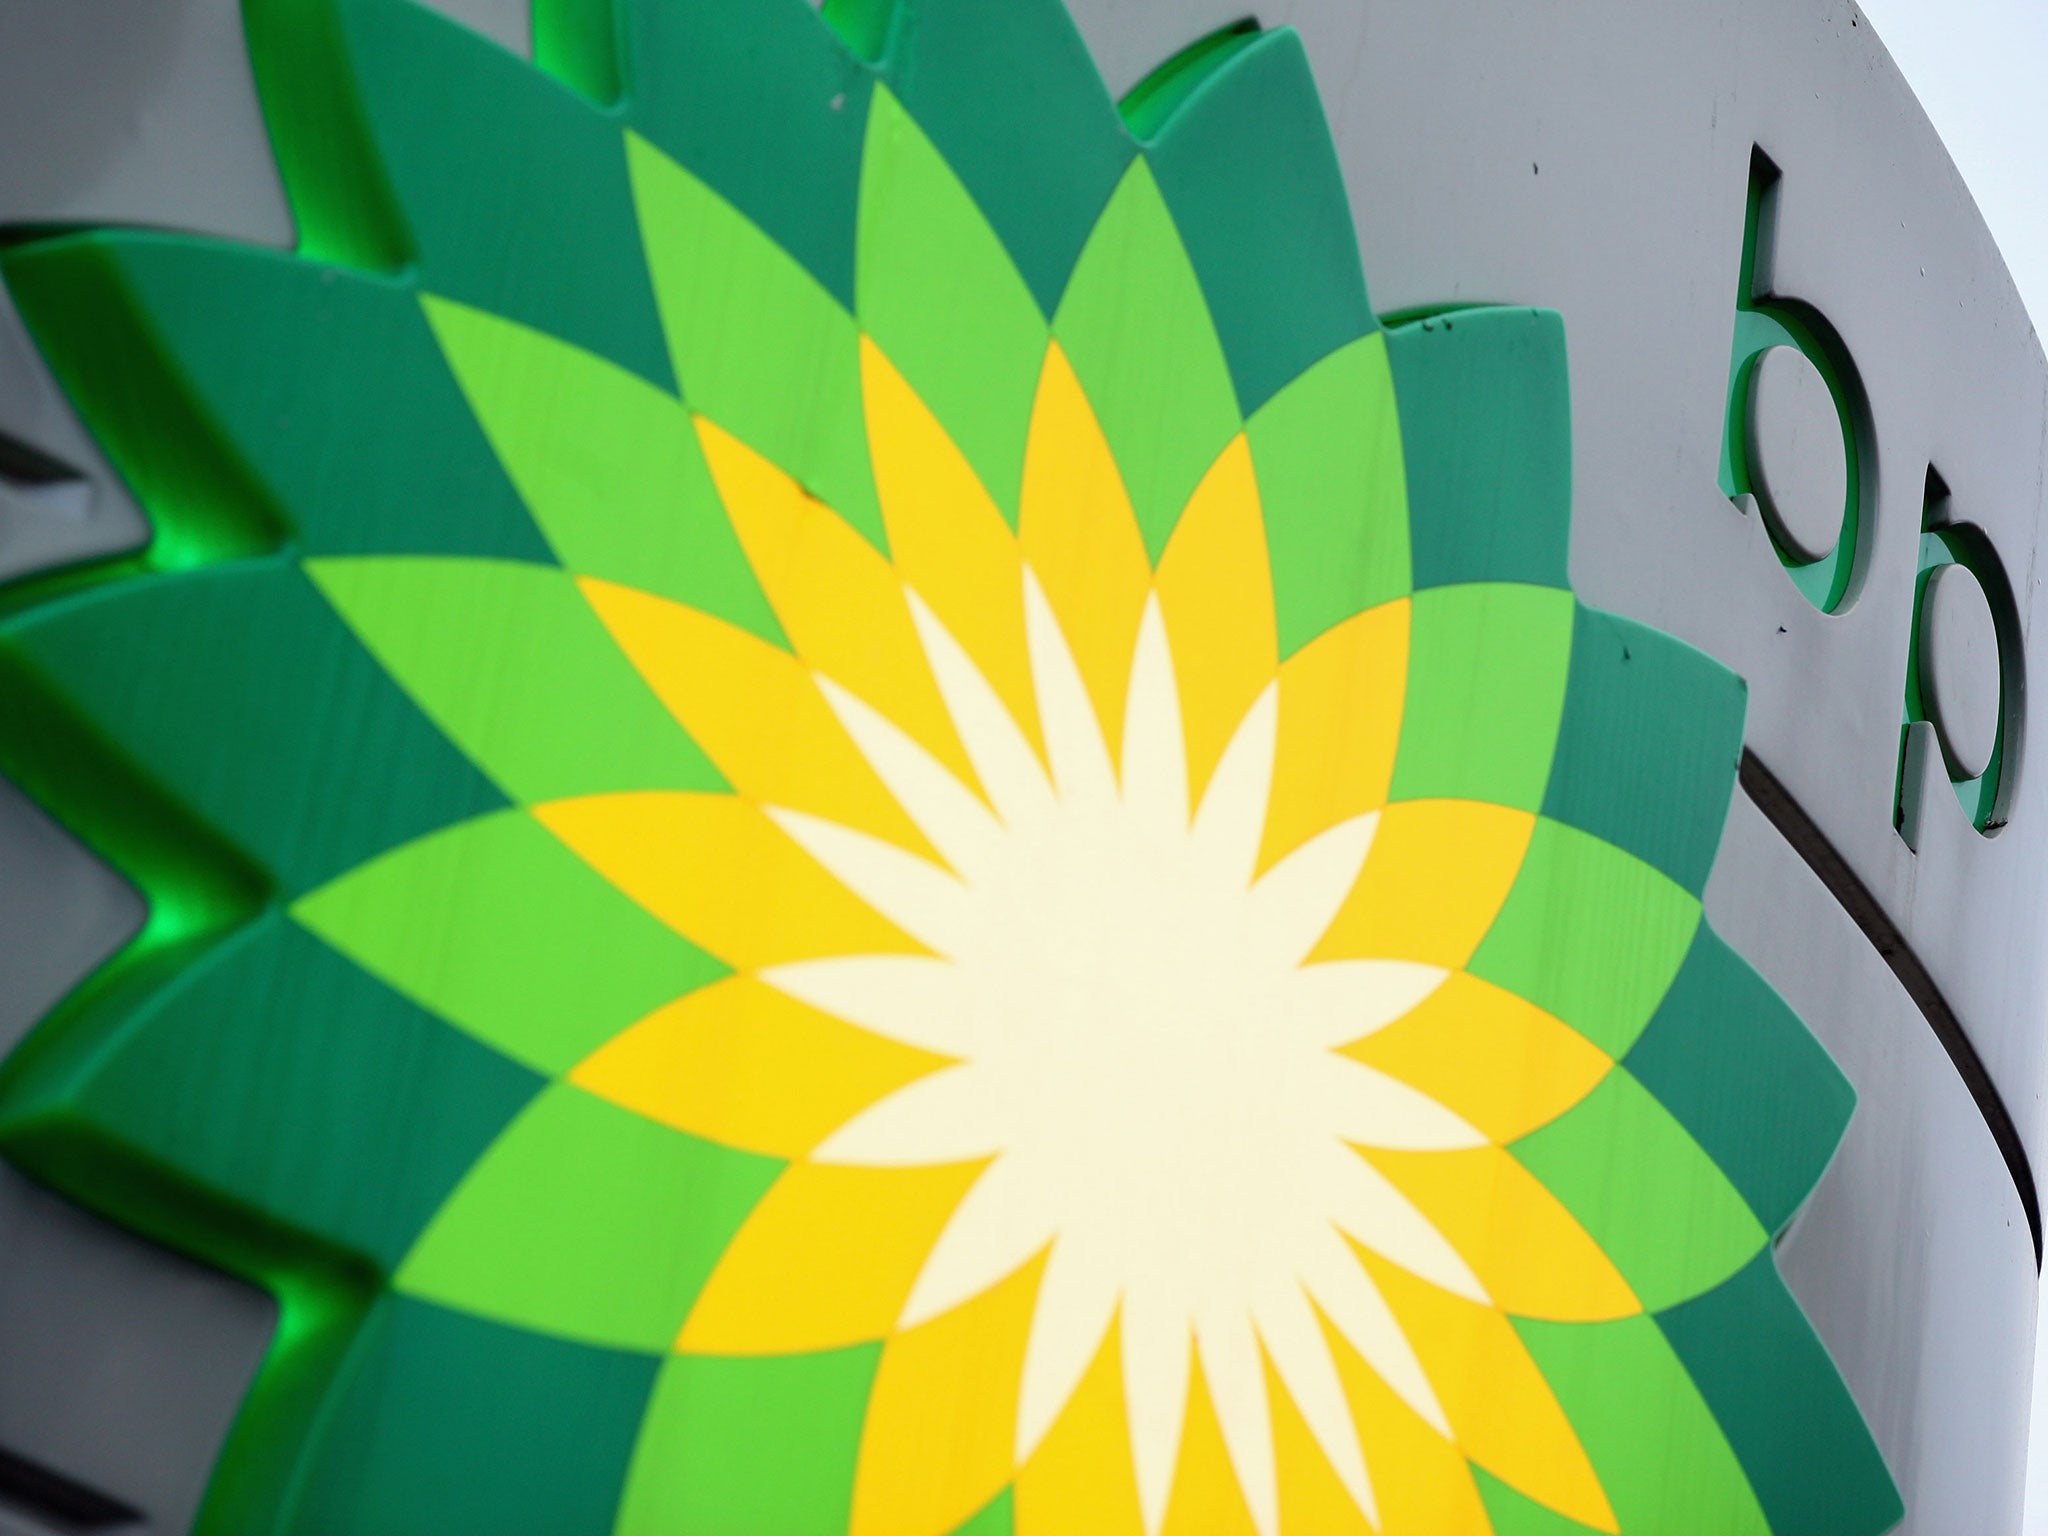 BP has defended the deal, saying that executives performed as well as they could despite a fall in the oil price